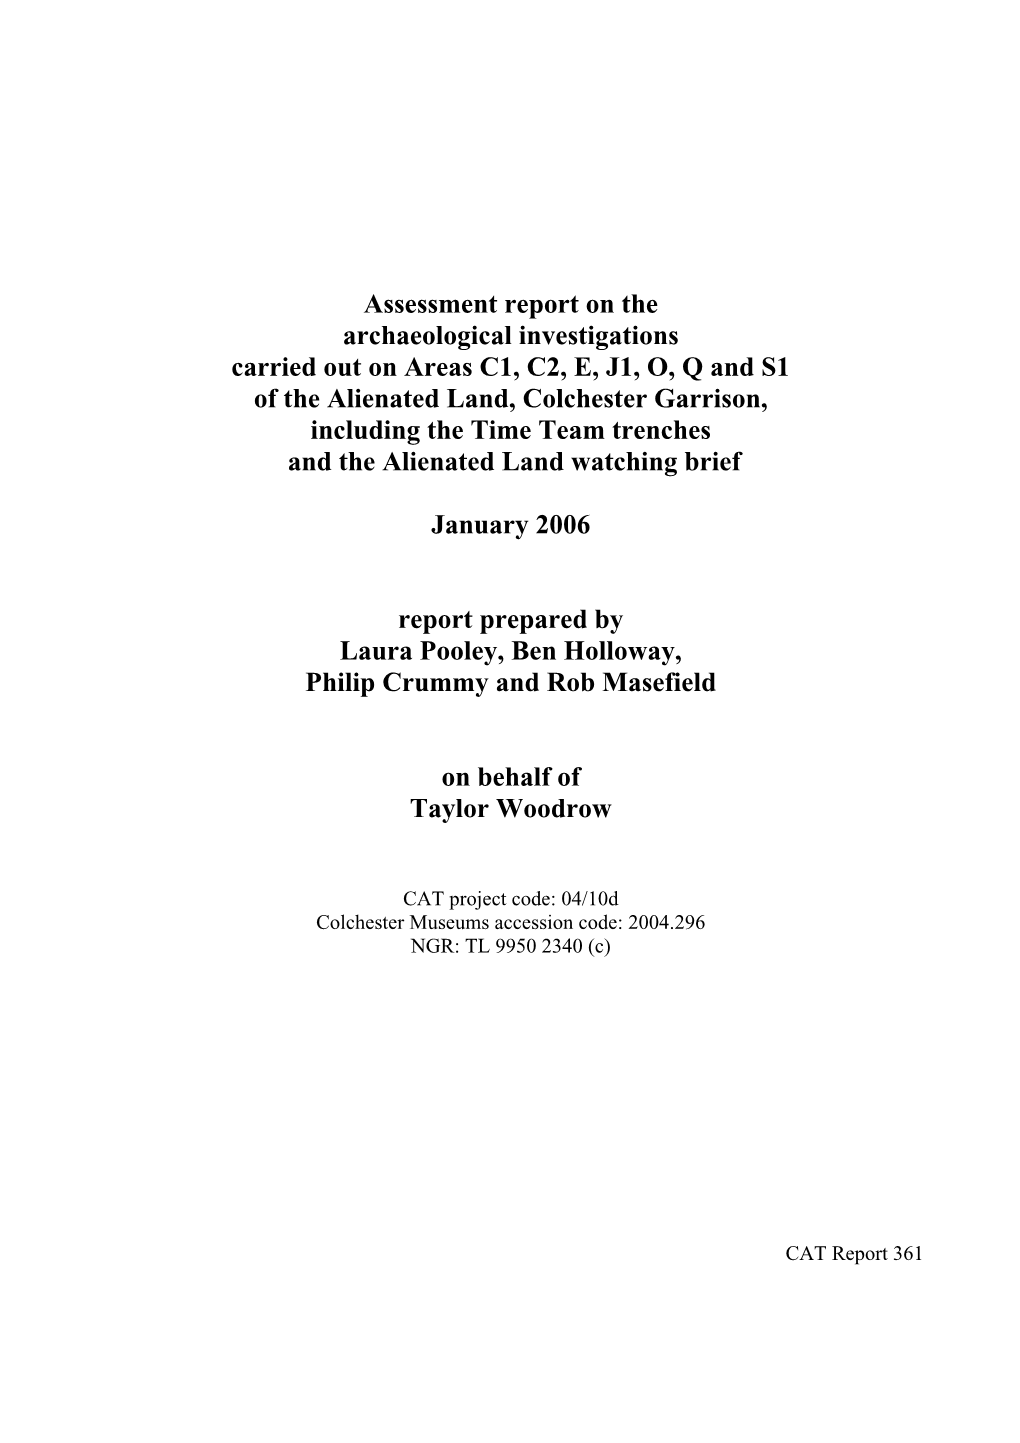 Assessment Report on the Archaeological Investigations Carried out on Areas C1, C2, E, J1, O, Q and S1 of the Alienated Land, Co